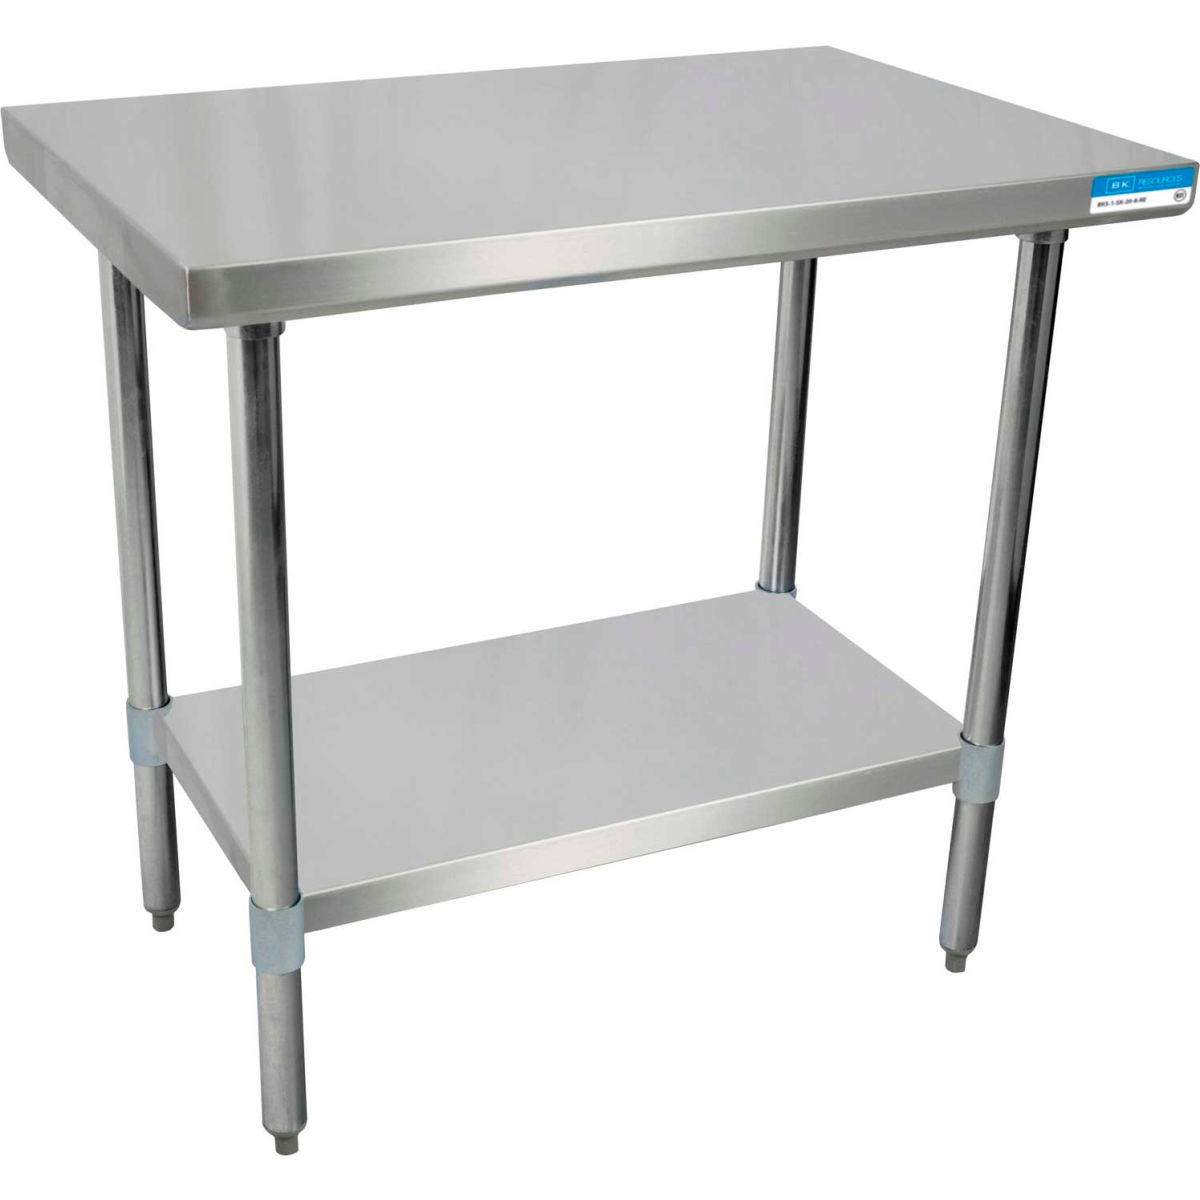 Picture of BK Resources B0899563 18 Gauge 430 Series Stainless Workbench with Undershelf - 48 x 30 in.